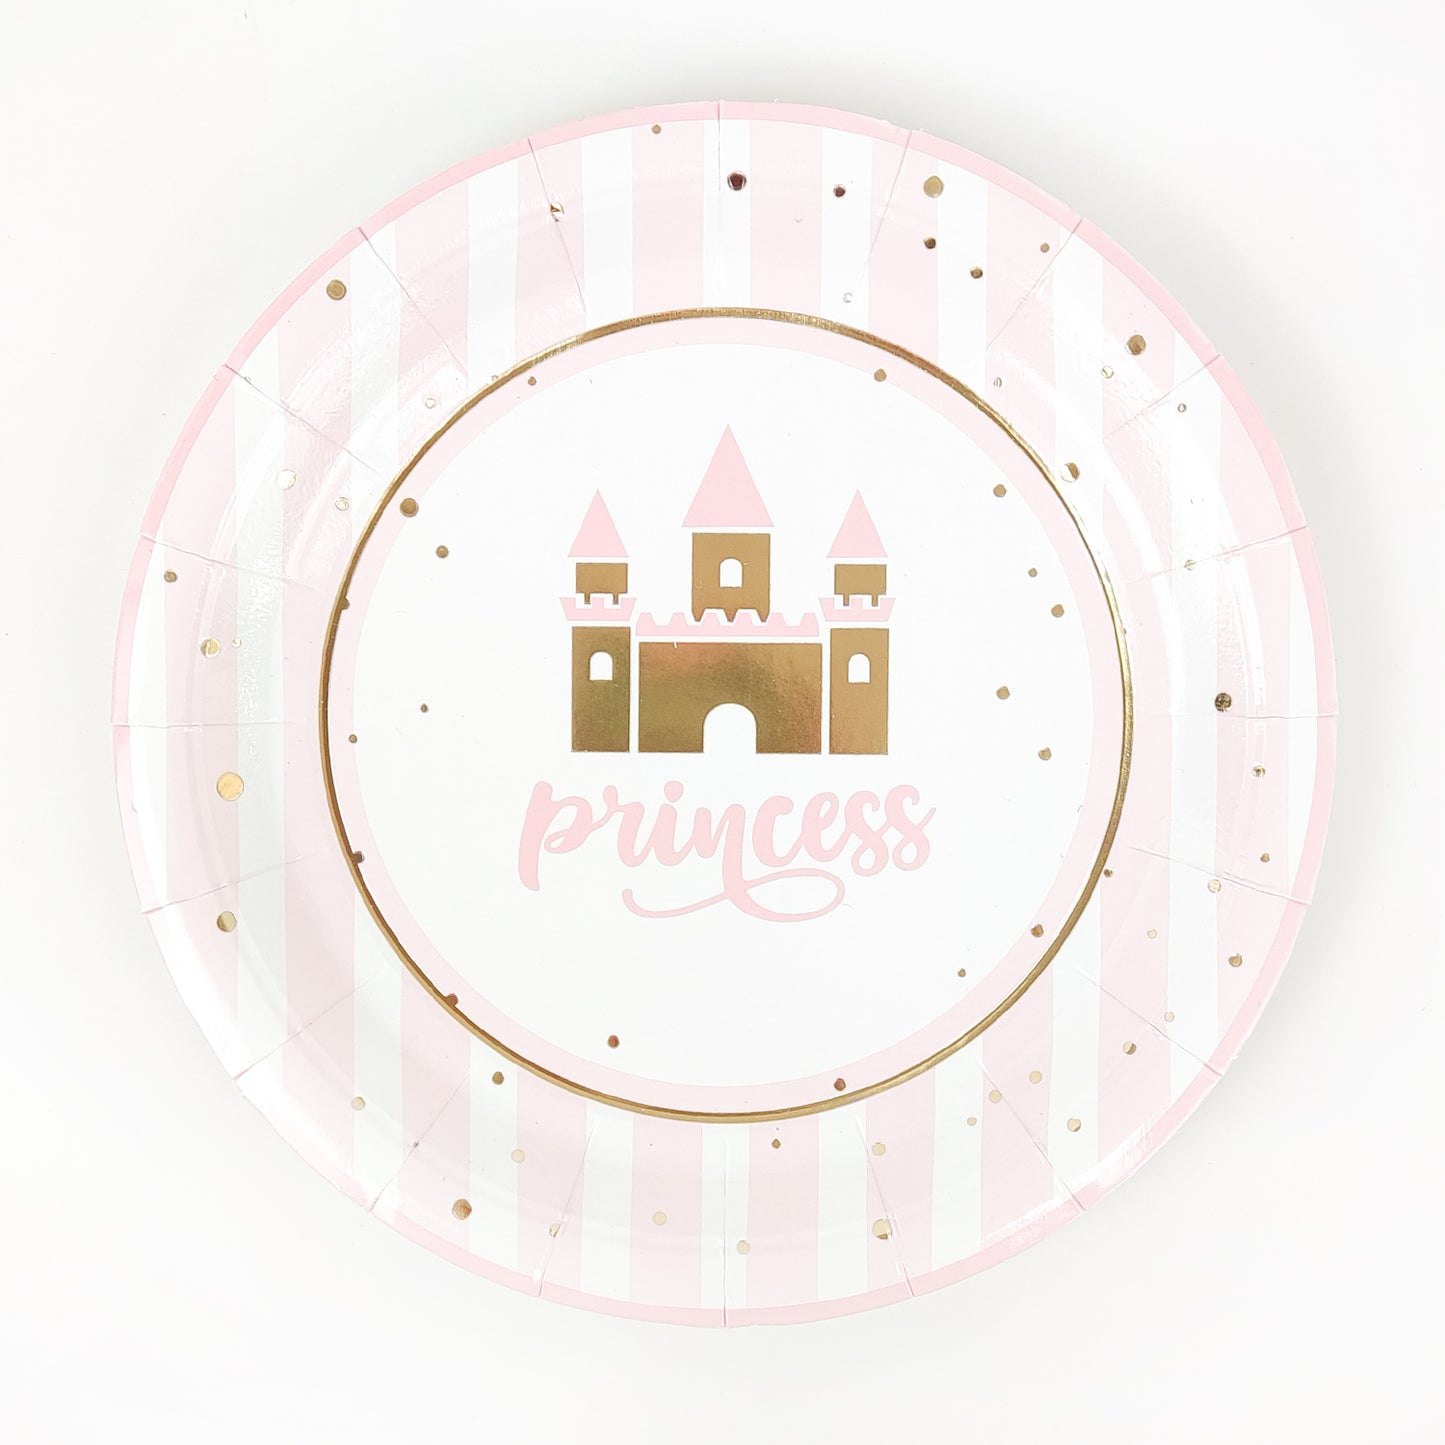 Princess Design Disposable Tableware Set Party Plates Cups Napkins for Girl's Party Decoration